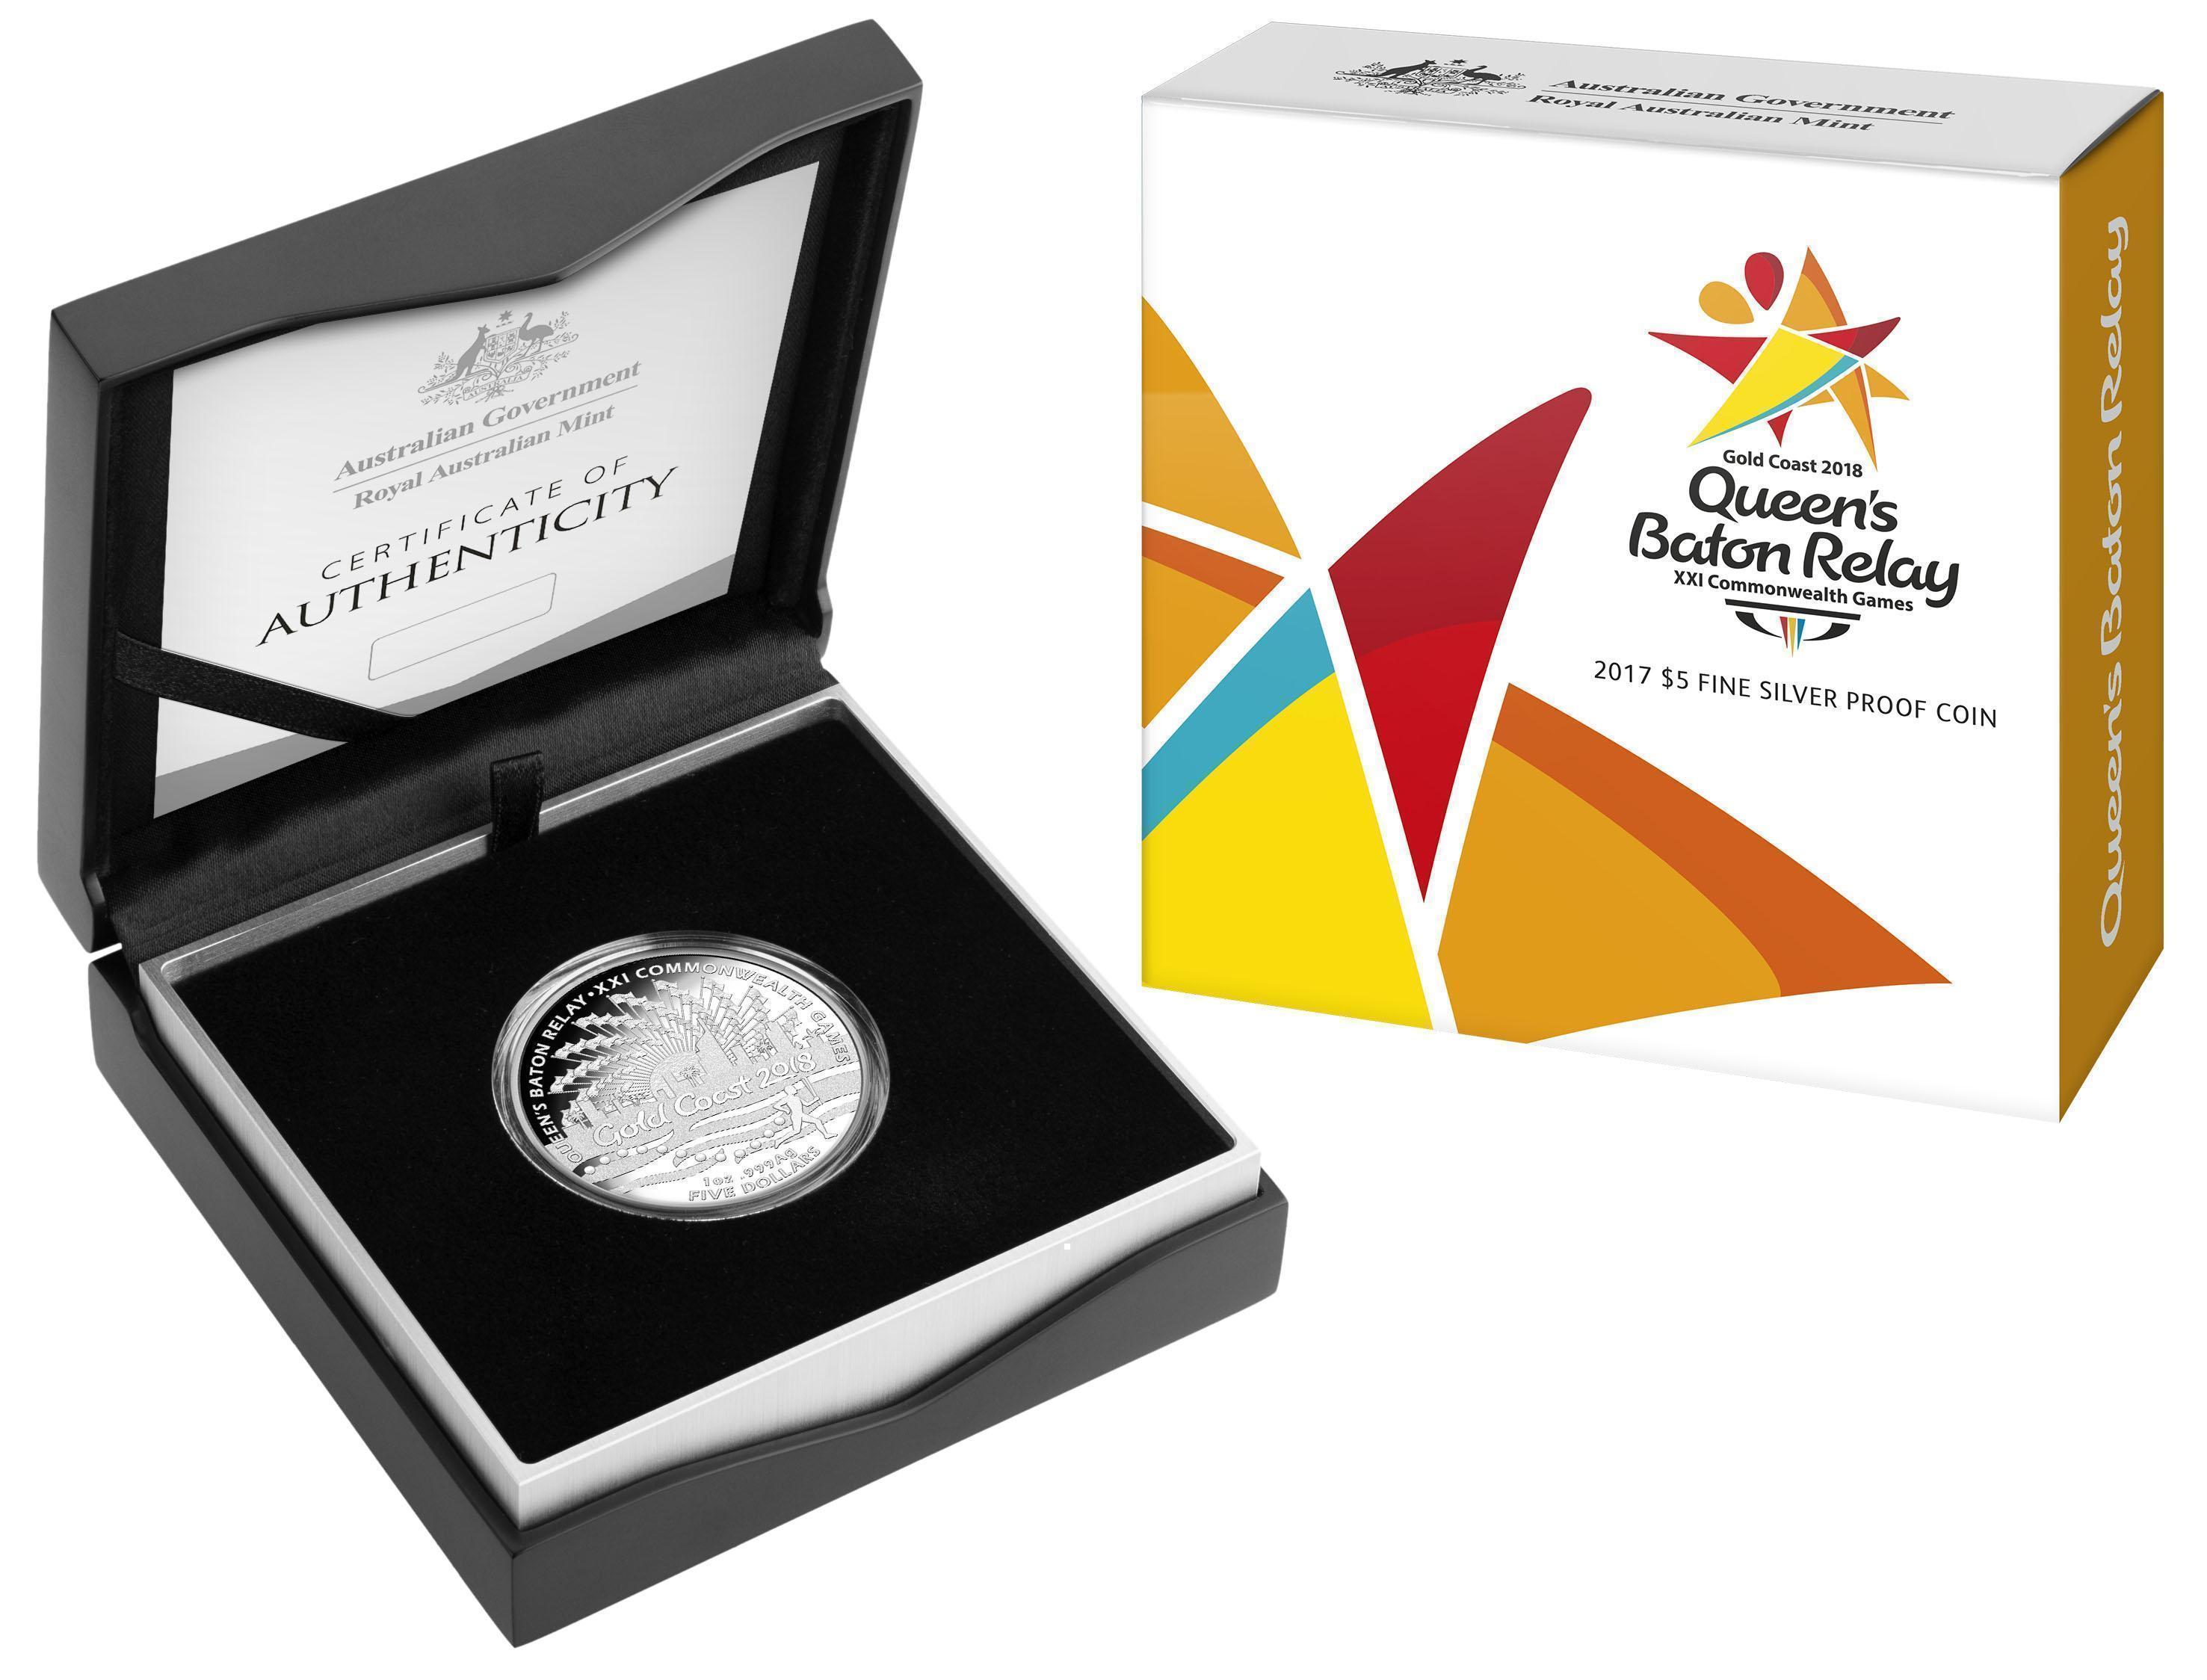 2017 Gold Coast Commonwealth Games Queen's Baton Relay $5 Fine Silver Proof Coin